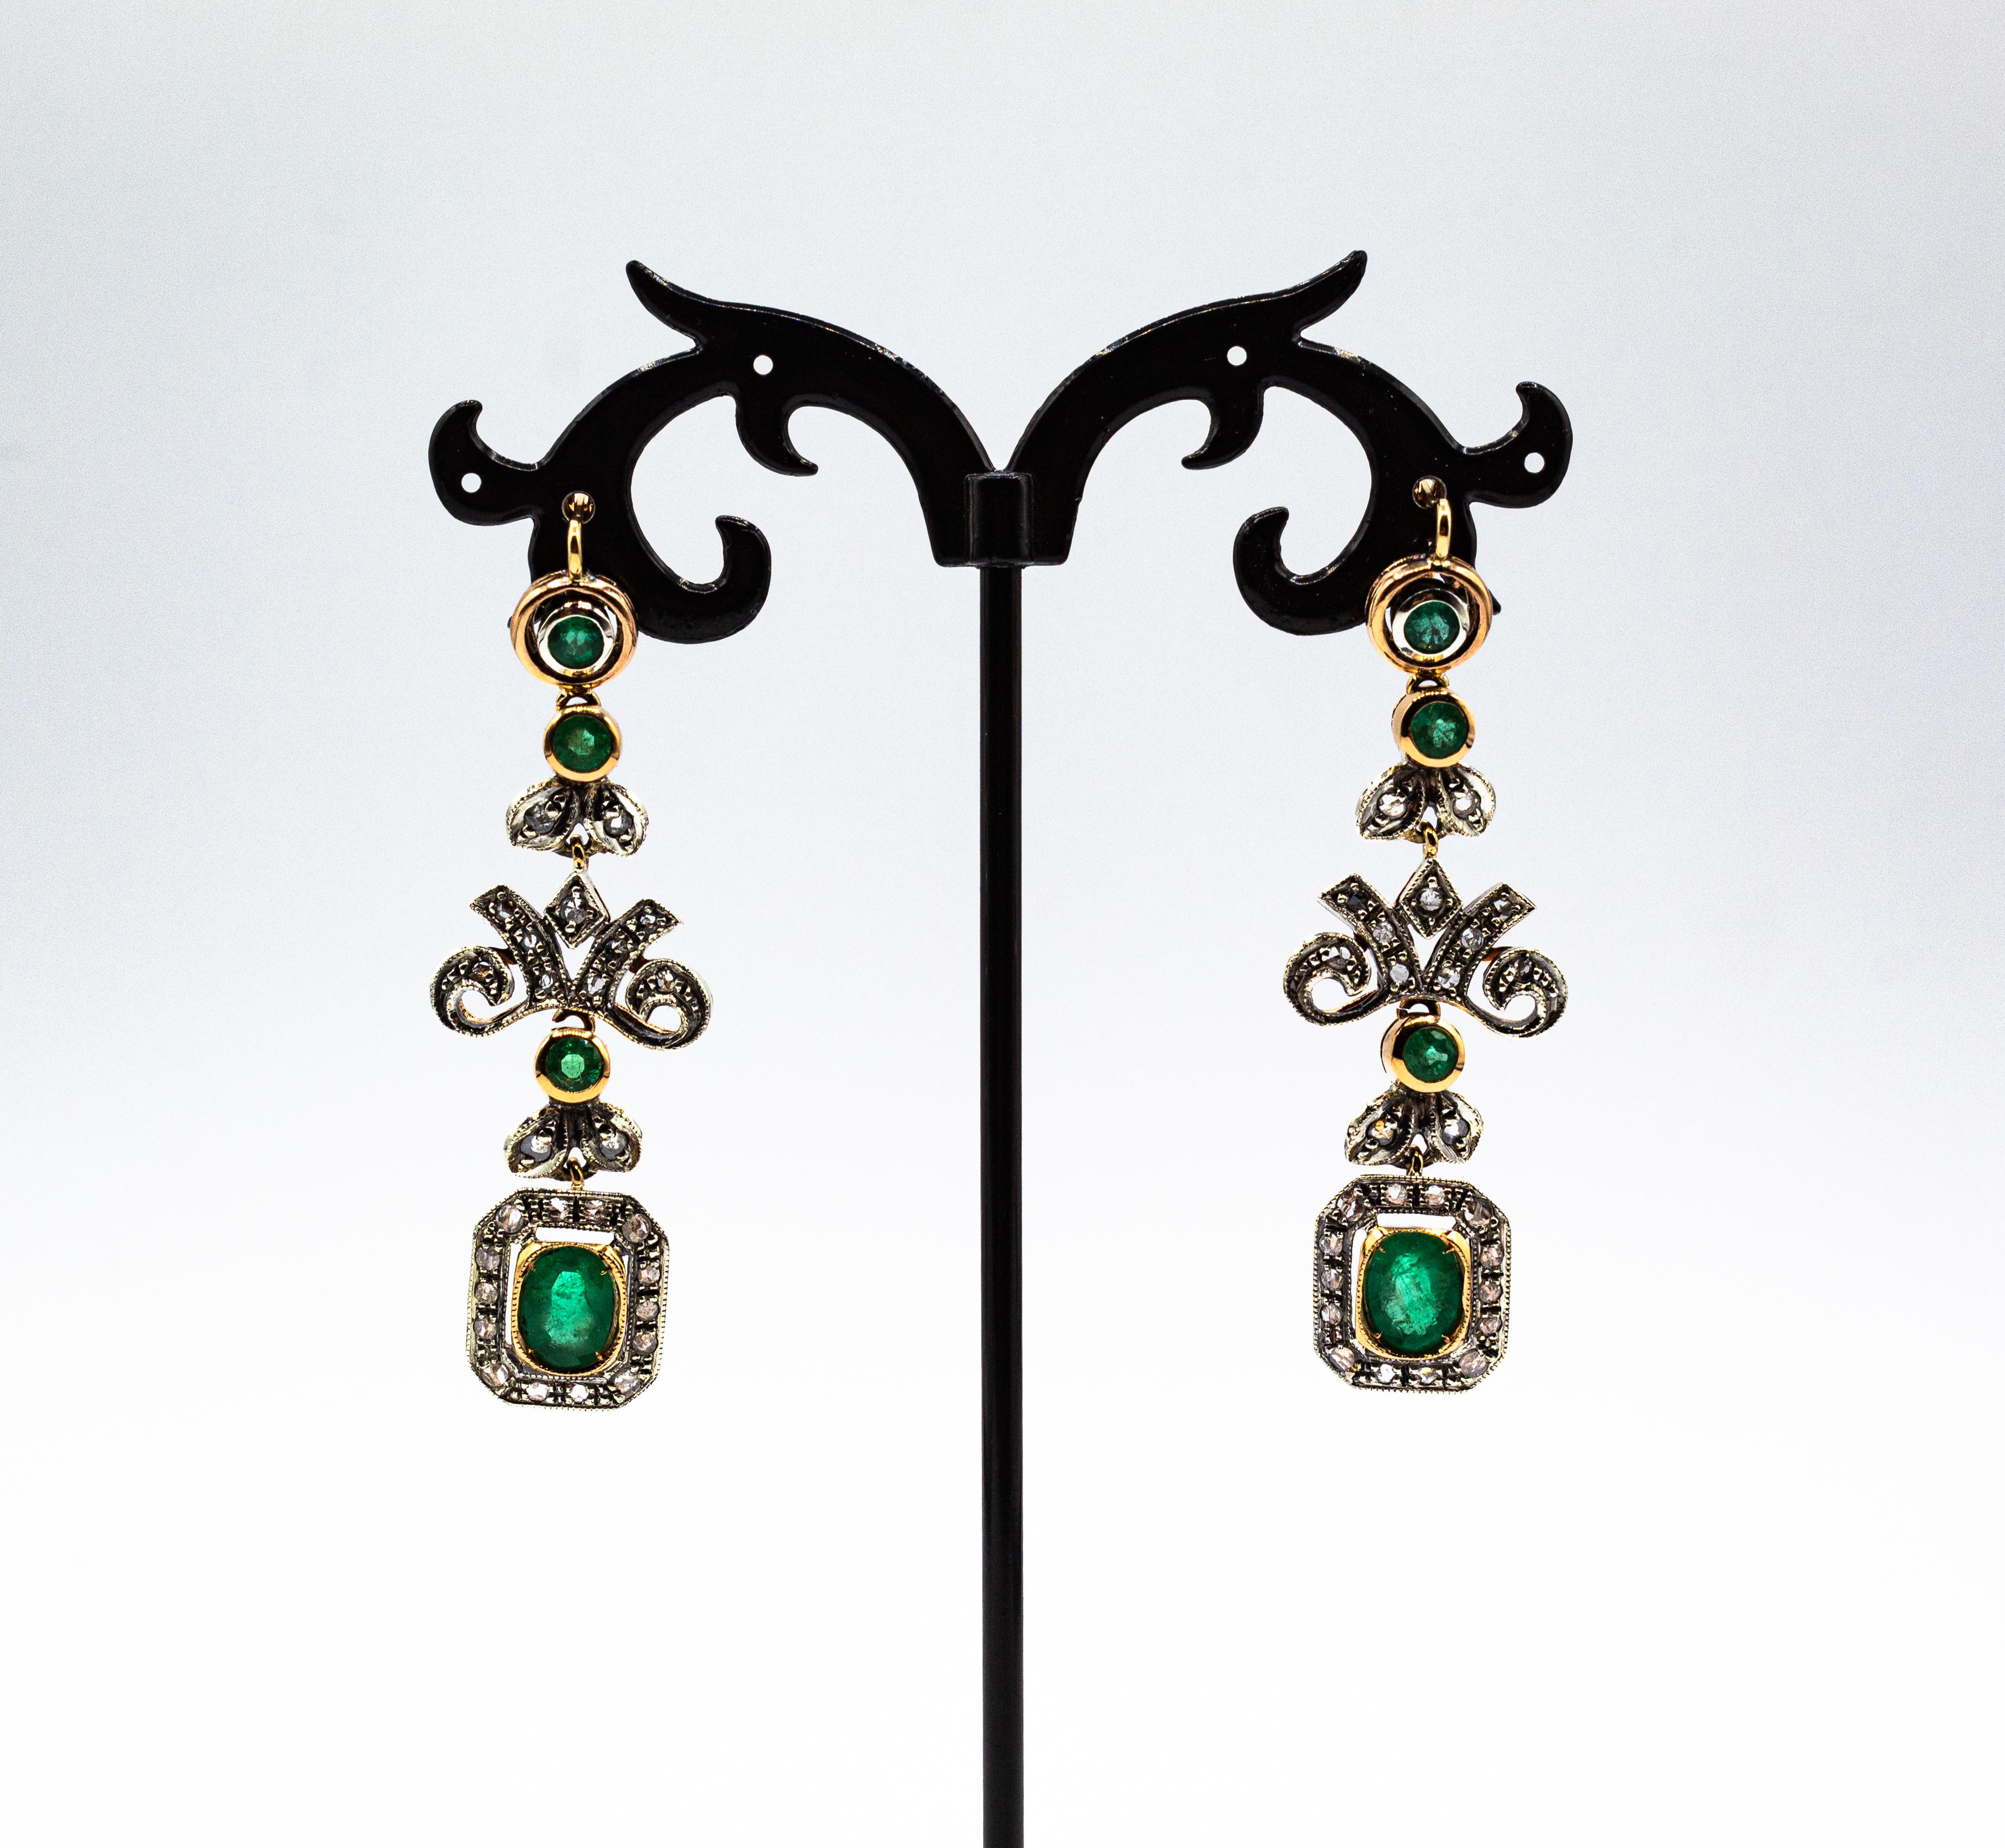 These Lever-Back Earrings are made of 9K Yellow Gold and Sterling Silver.
These Earrings have 0.60 Carats of White Rose Cut Diamonds.
These Earrings have also 3.83 Carat of Modern Round Cut and Oval Cut Emeralds.

These Earrings are available also